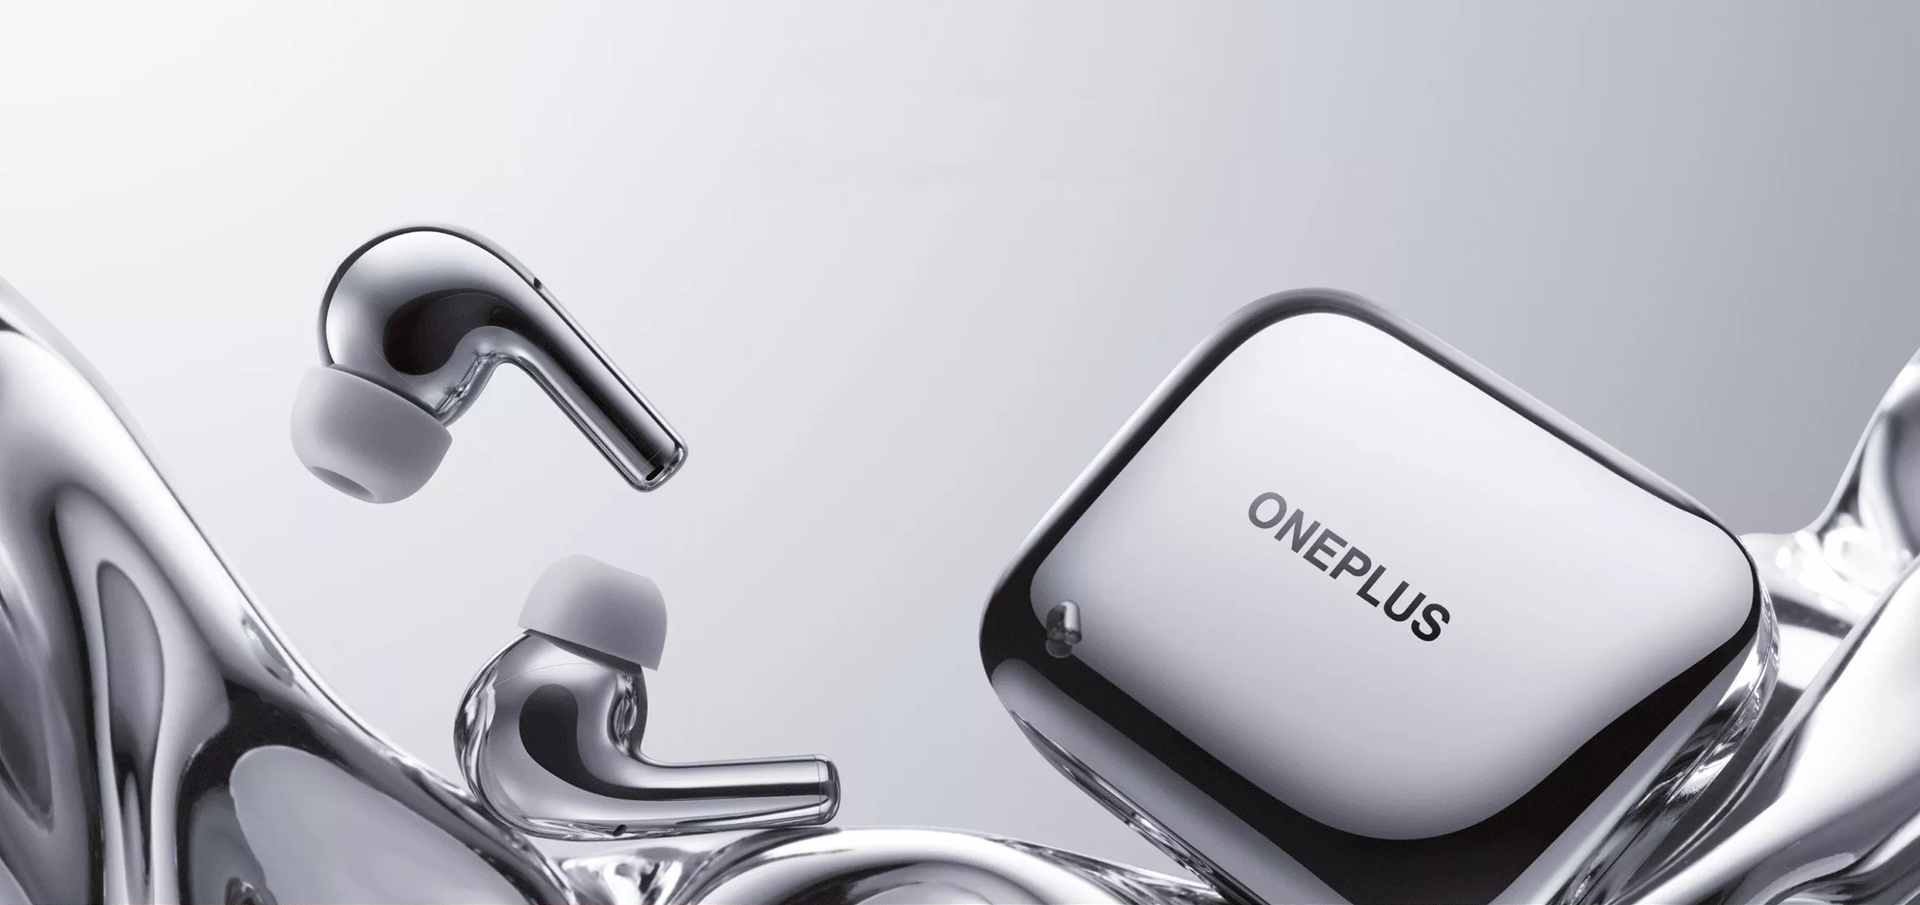 OnePlus introduces a weirdly Lord-of-the-Rings-themed pair of earbuds for some reason